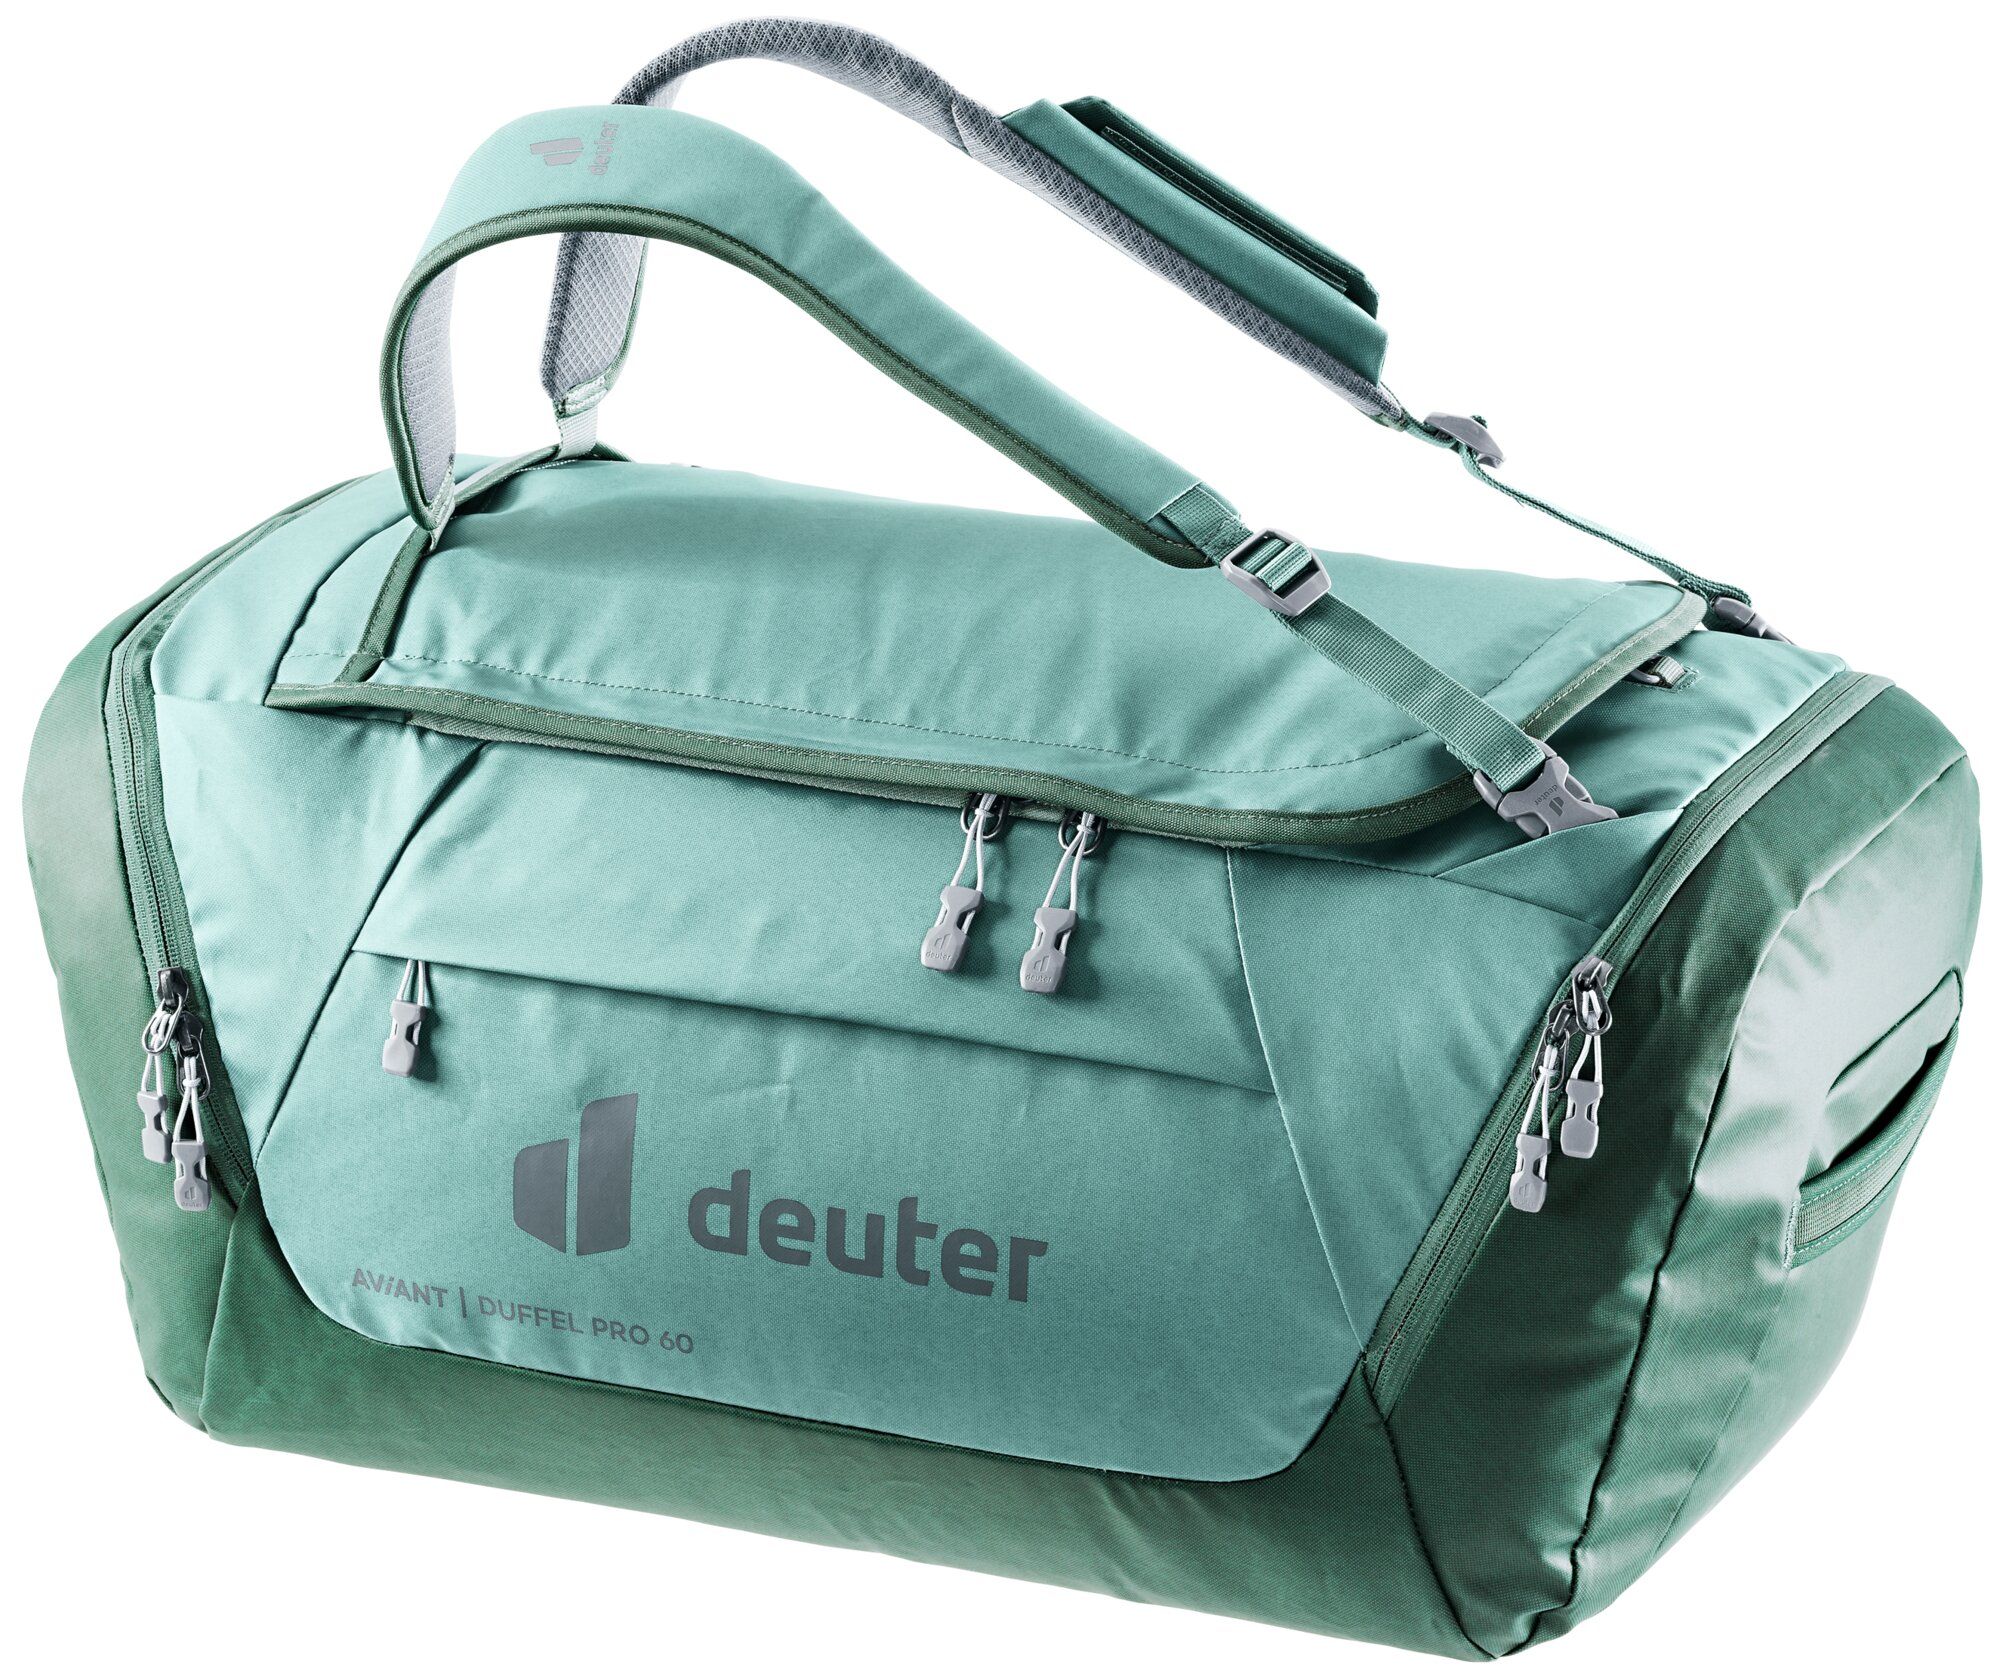 Deuter AViANT Duffel Pro Movo 90 - Luggage, Free EU Delivery